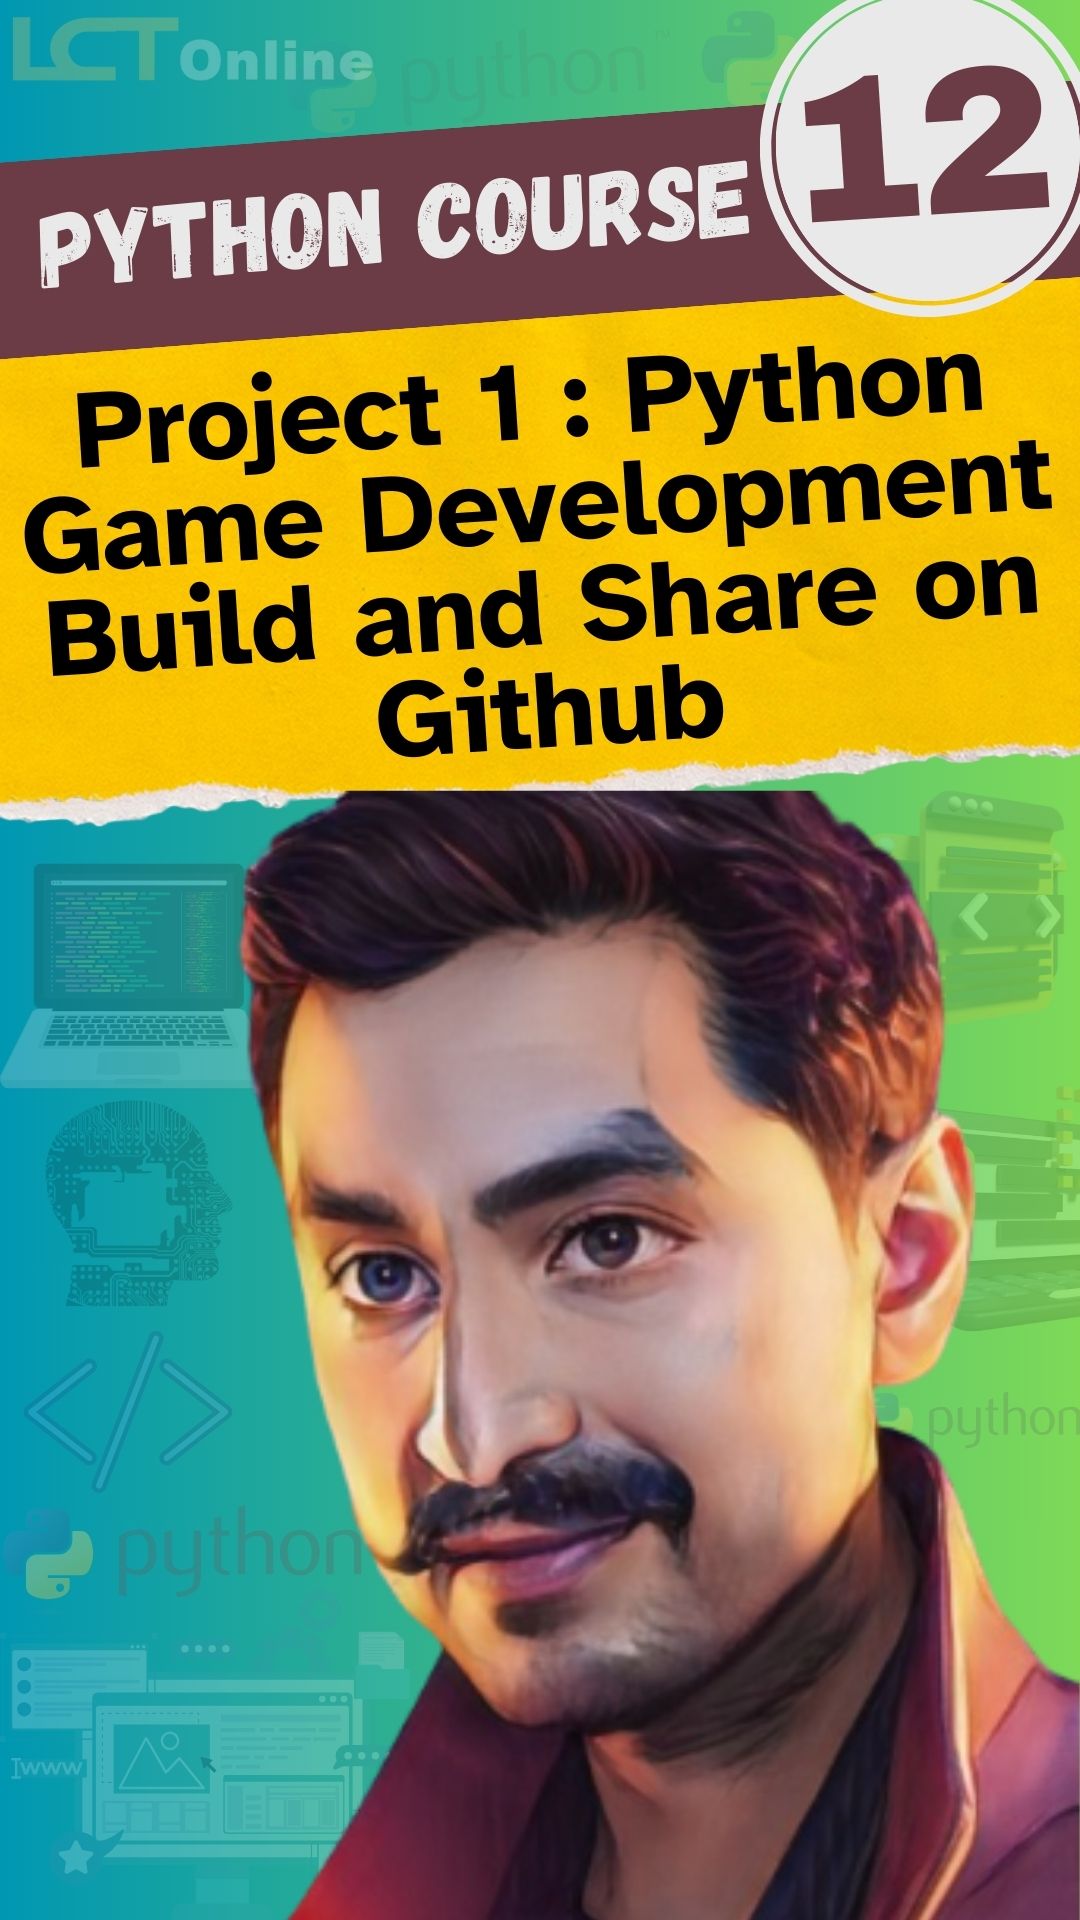 Project 1 : Python Game Development: Build and Share on Github